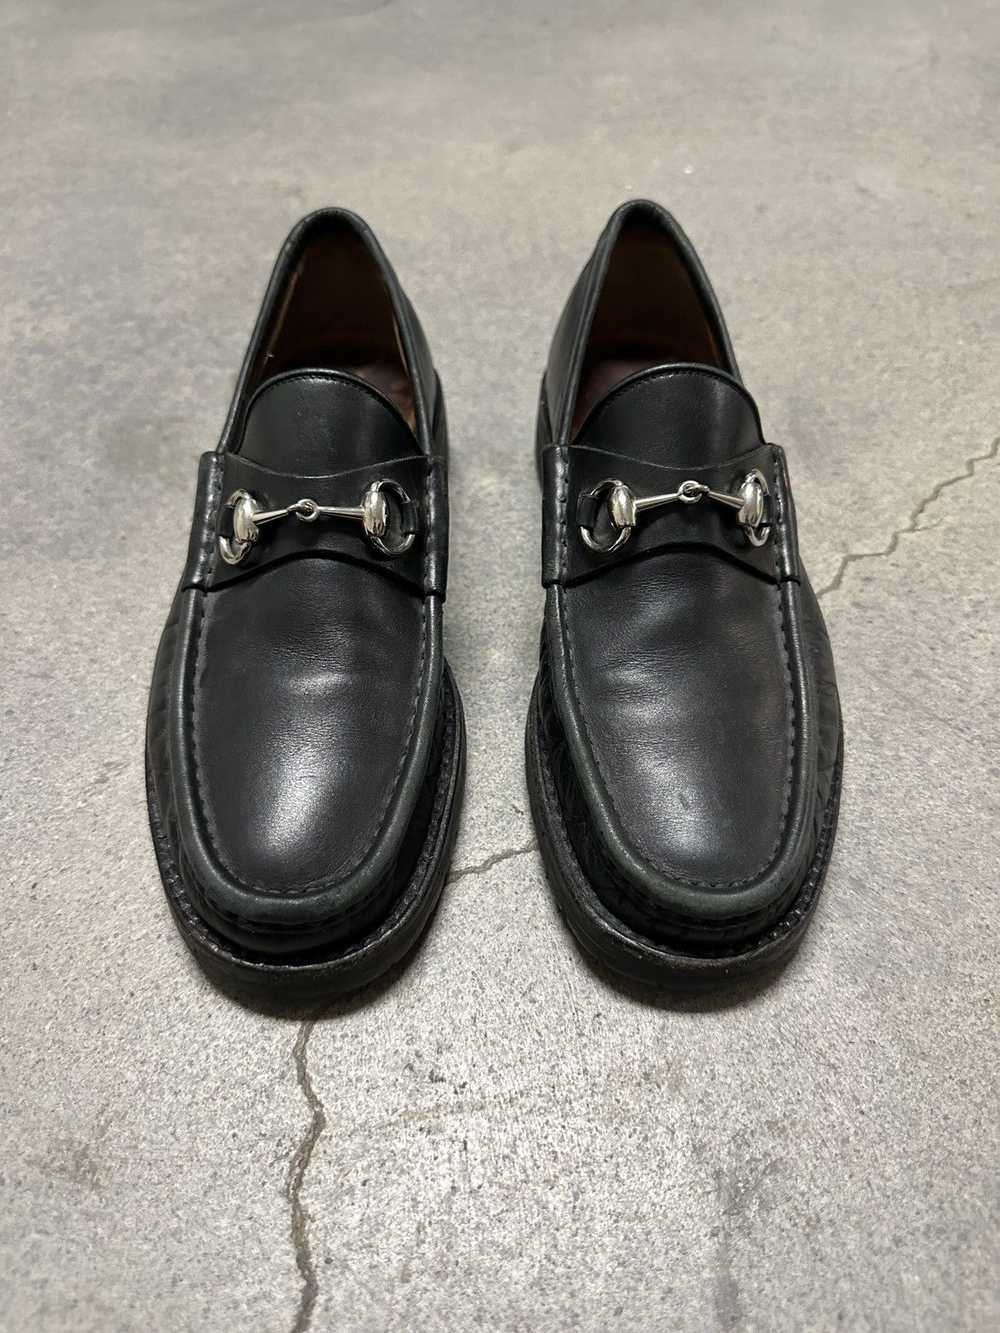 Gucci Gucci Loafer with Horsebit Size 7.5 - image 2